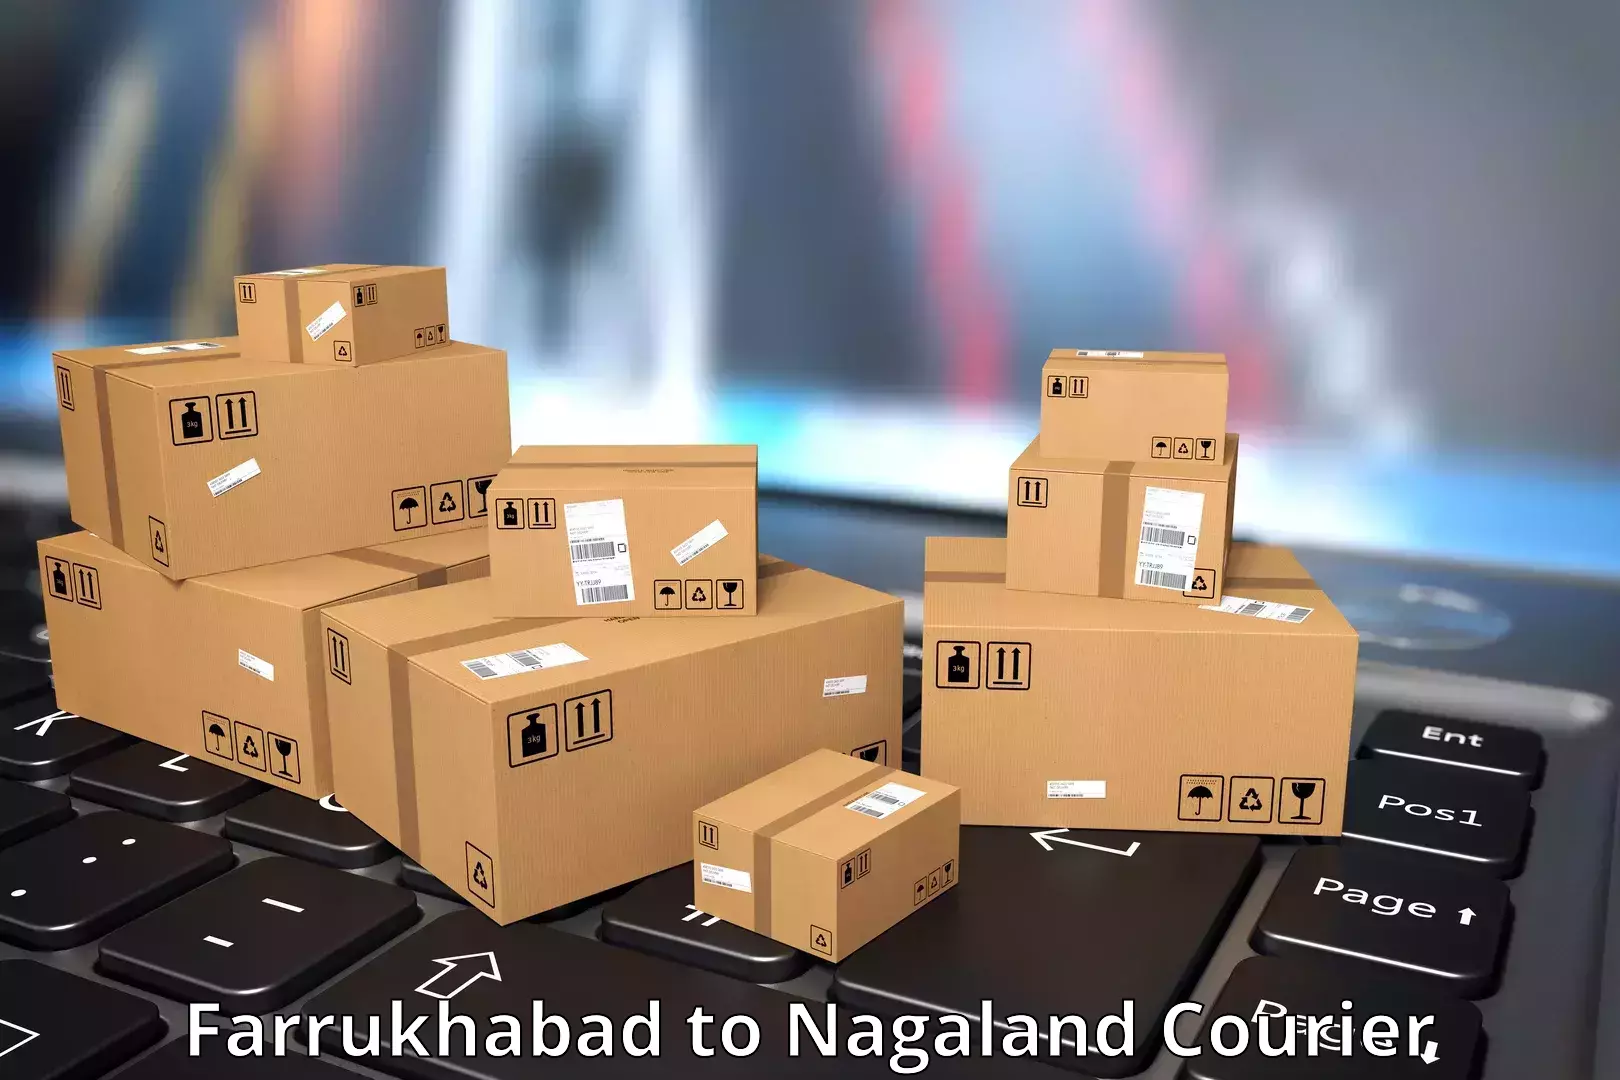 International courier networks Farrukhabad to Nagaland